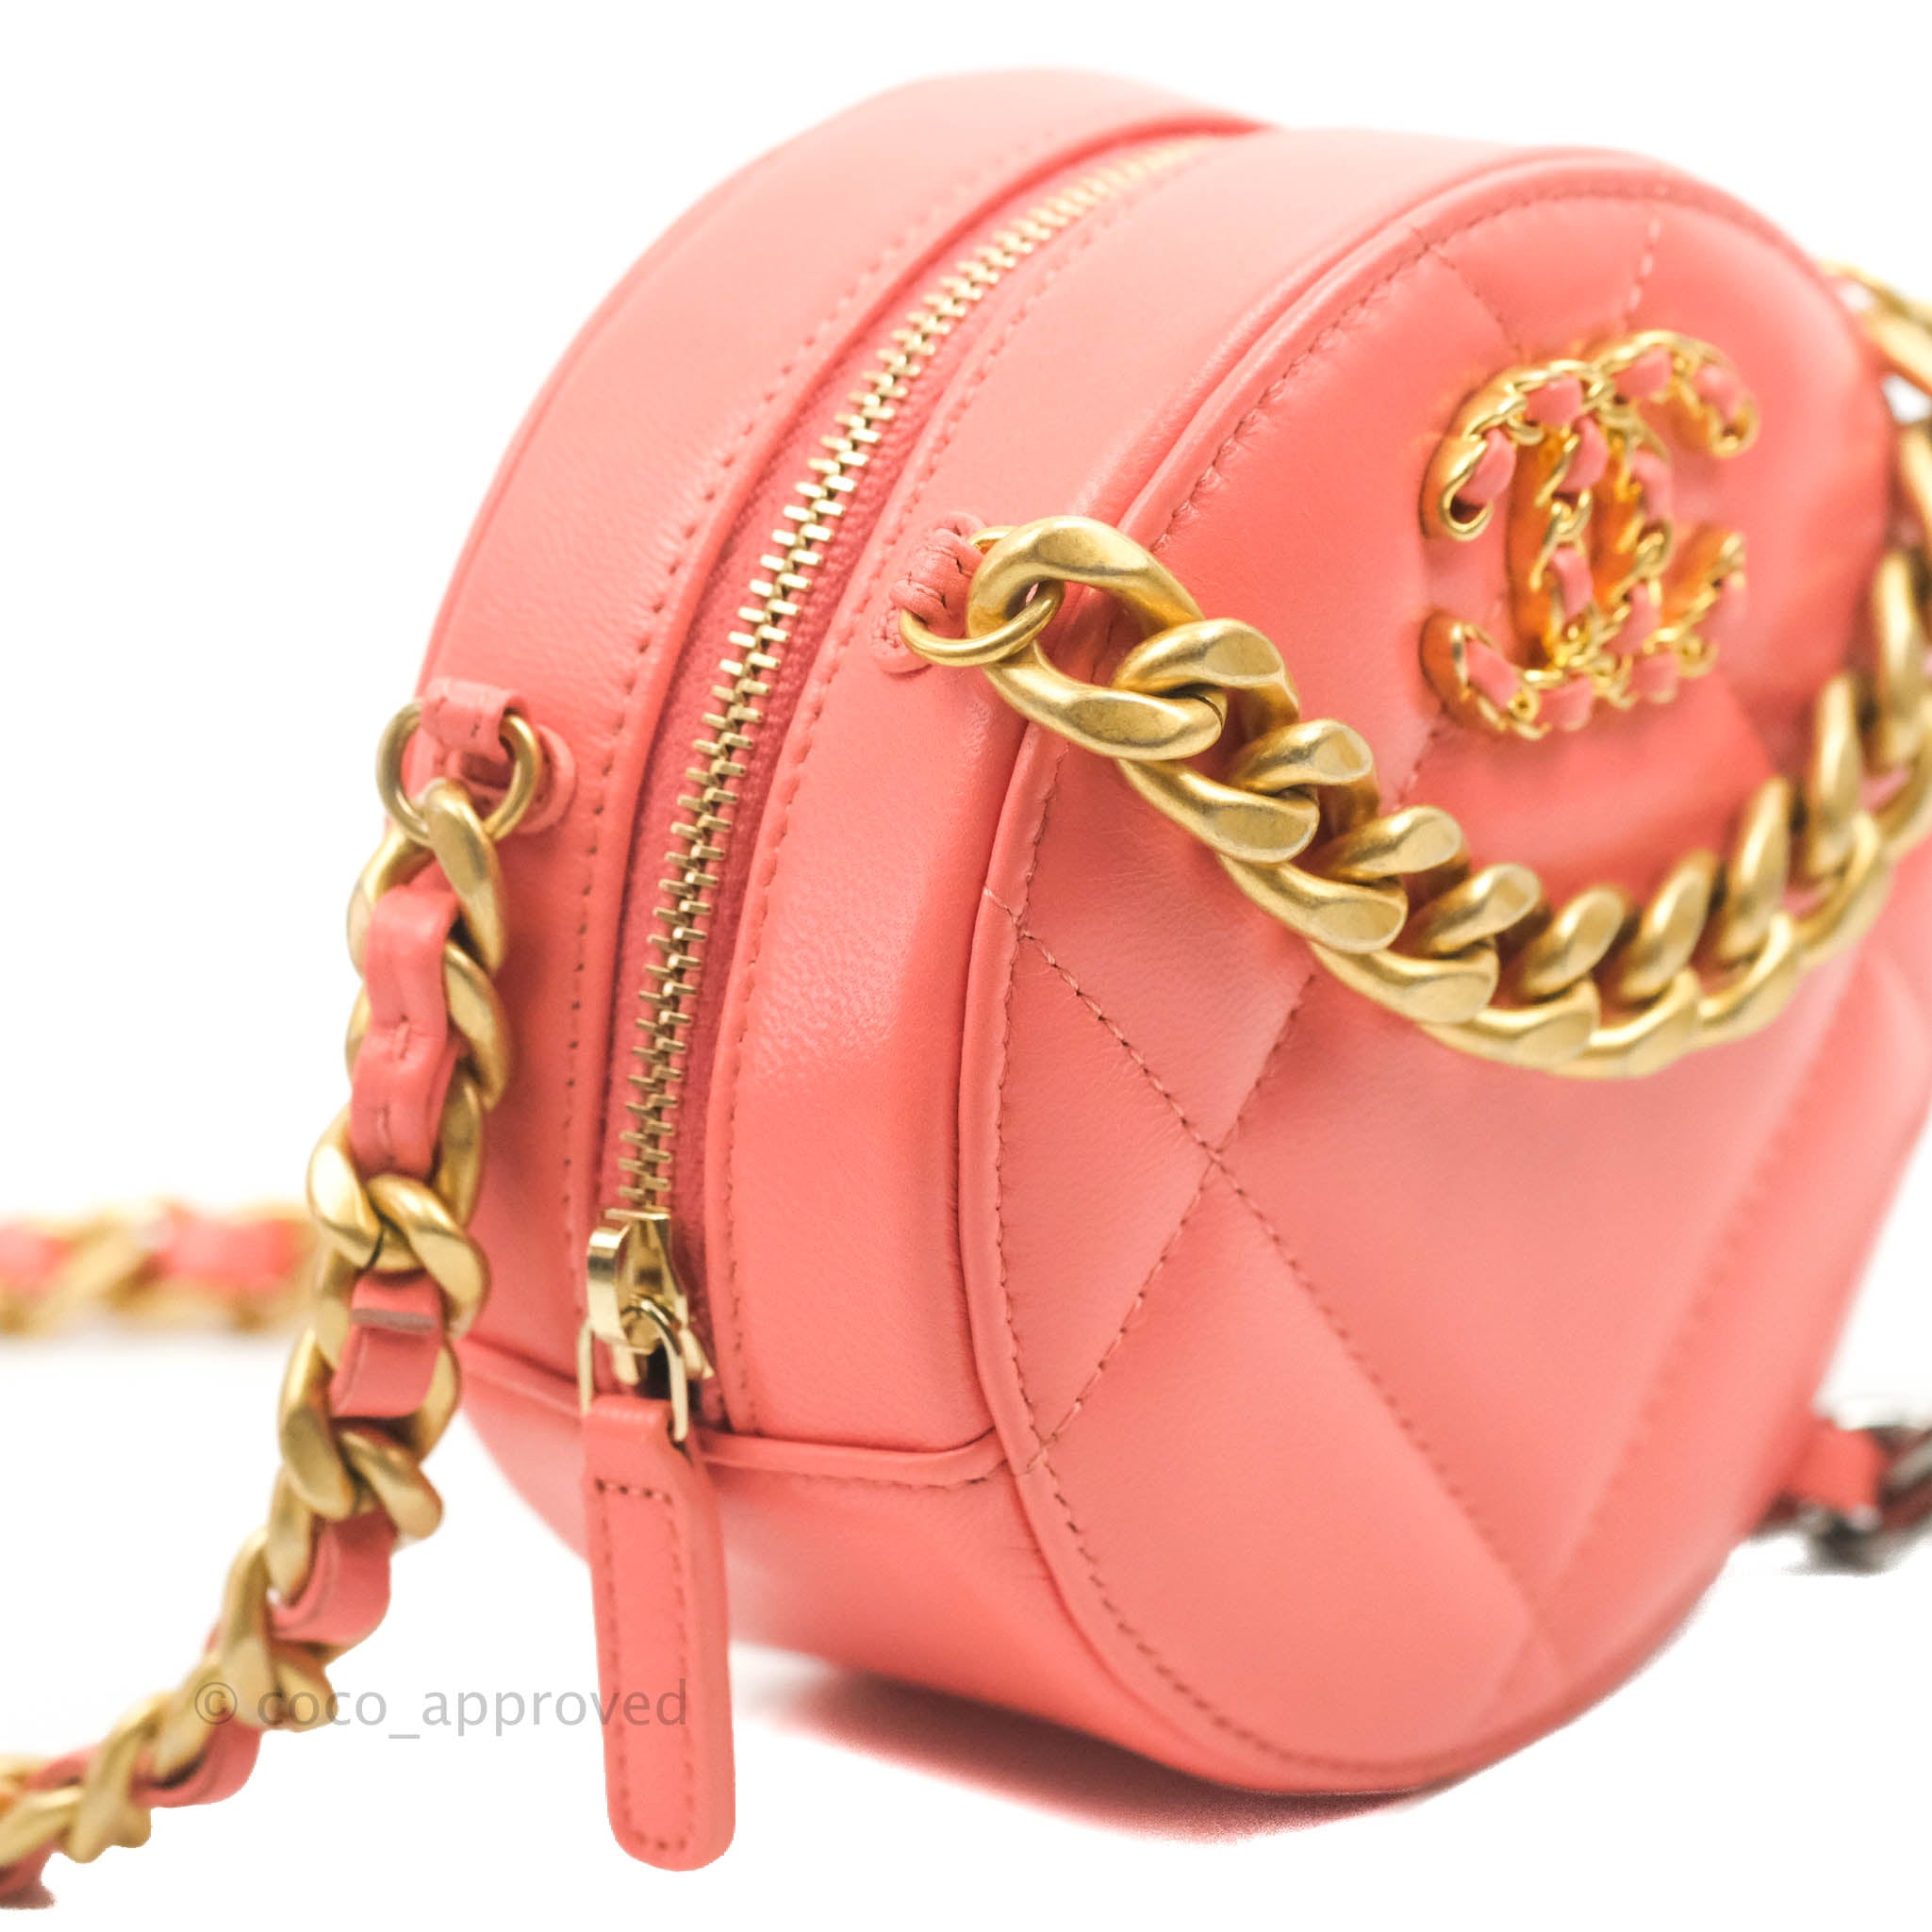 Chanel 19 Round Clutch With Chain Coral Pink Mixed Hardware – Coco Approved  Studio